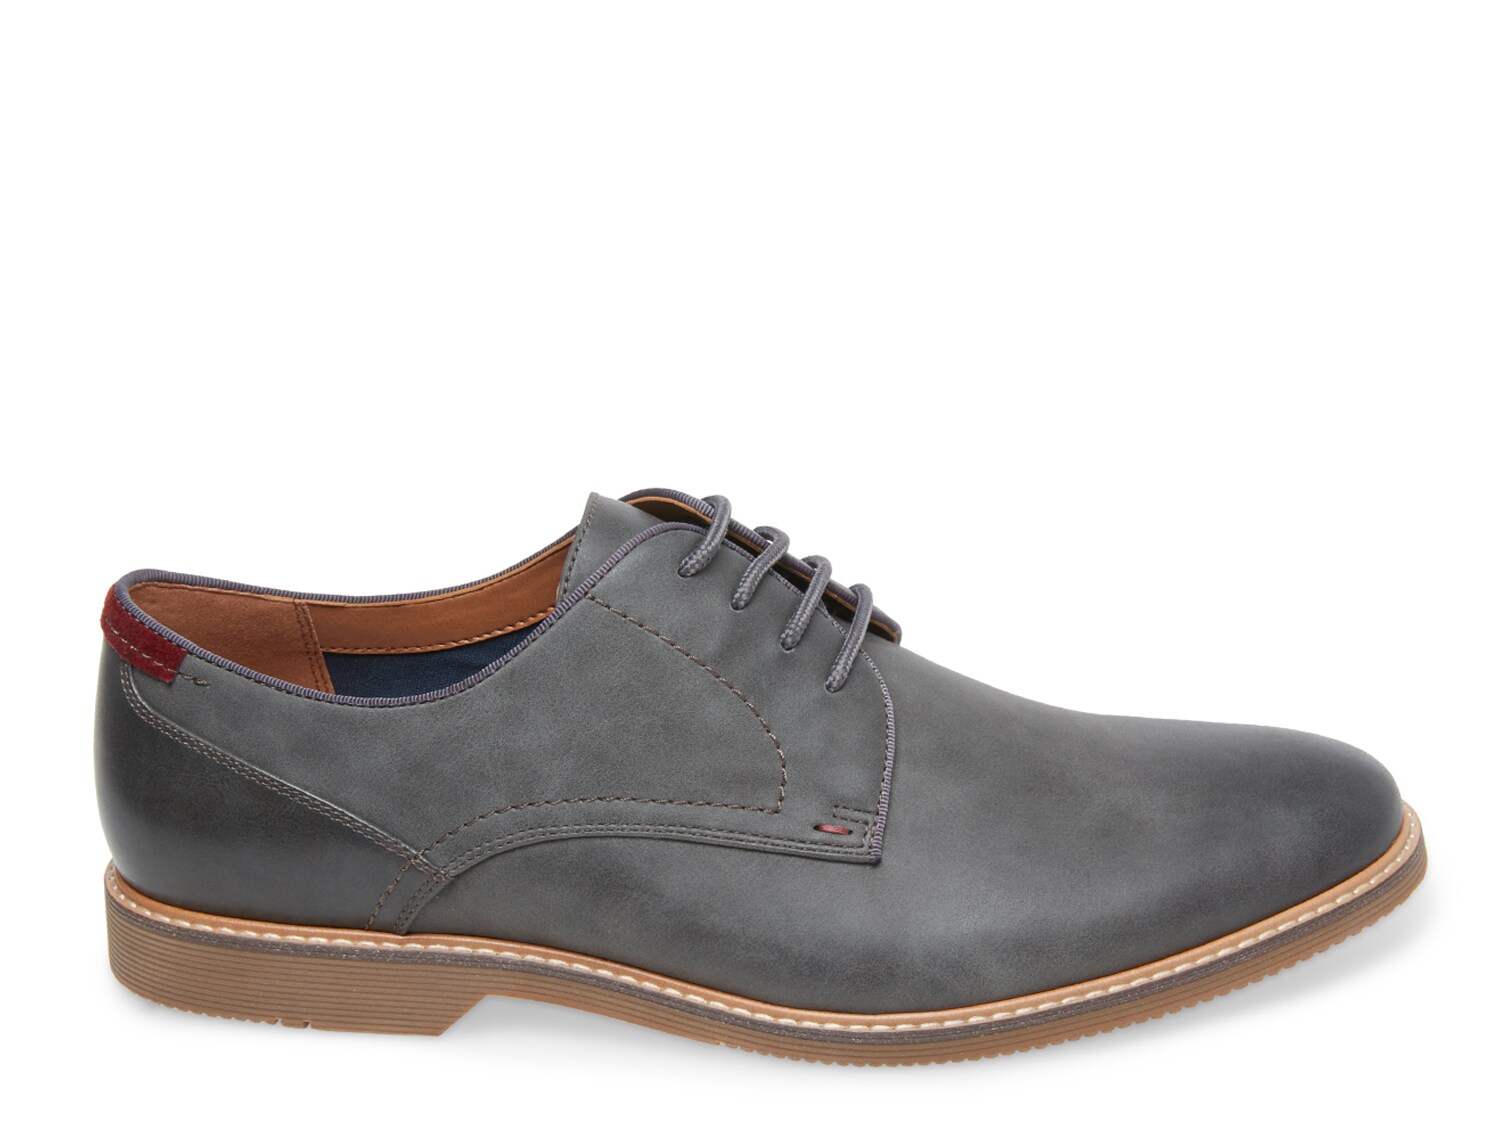 Steve Madden Ousted Oxford Men's Shoes 